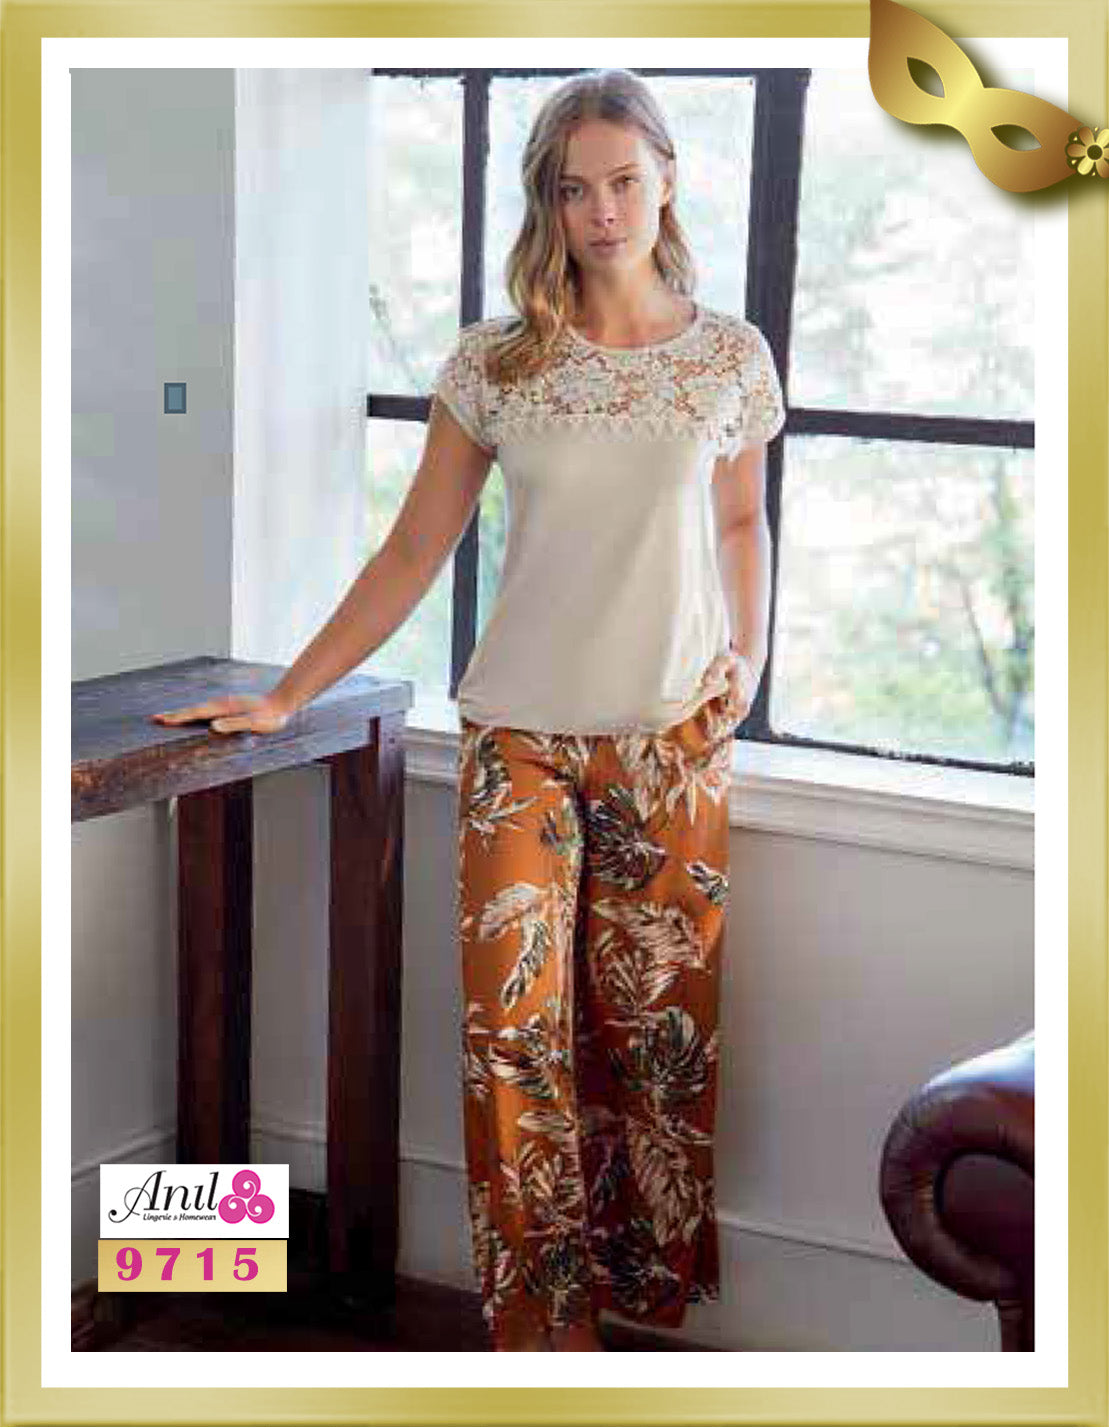 Anil Lace Detailed Top and Printed Pants Pajamas 9715 XL